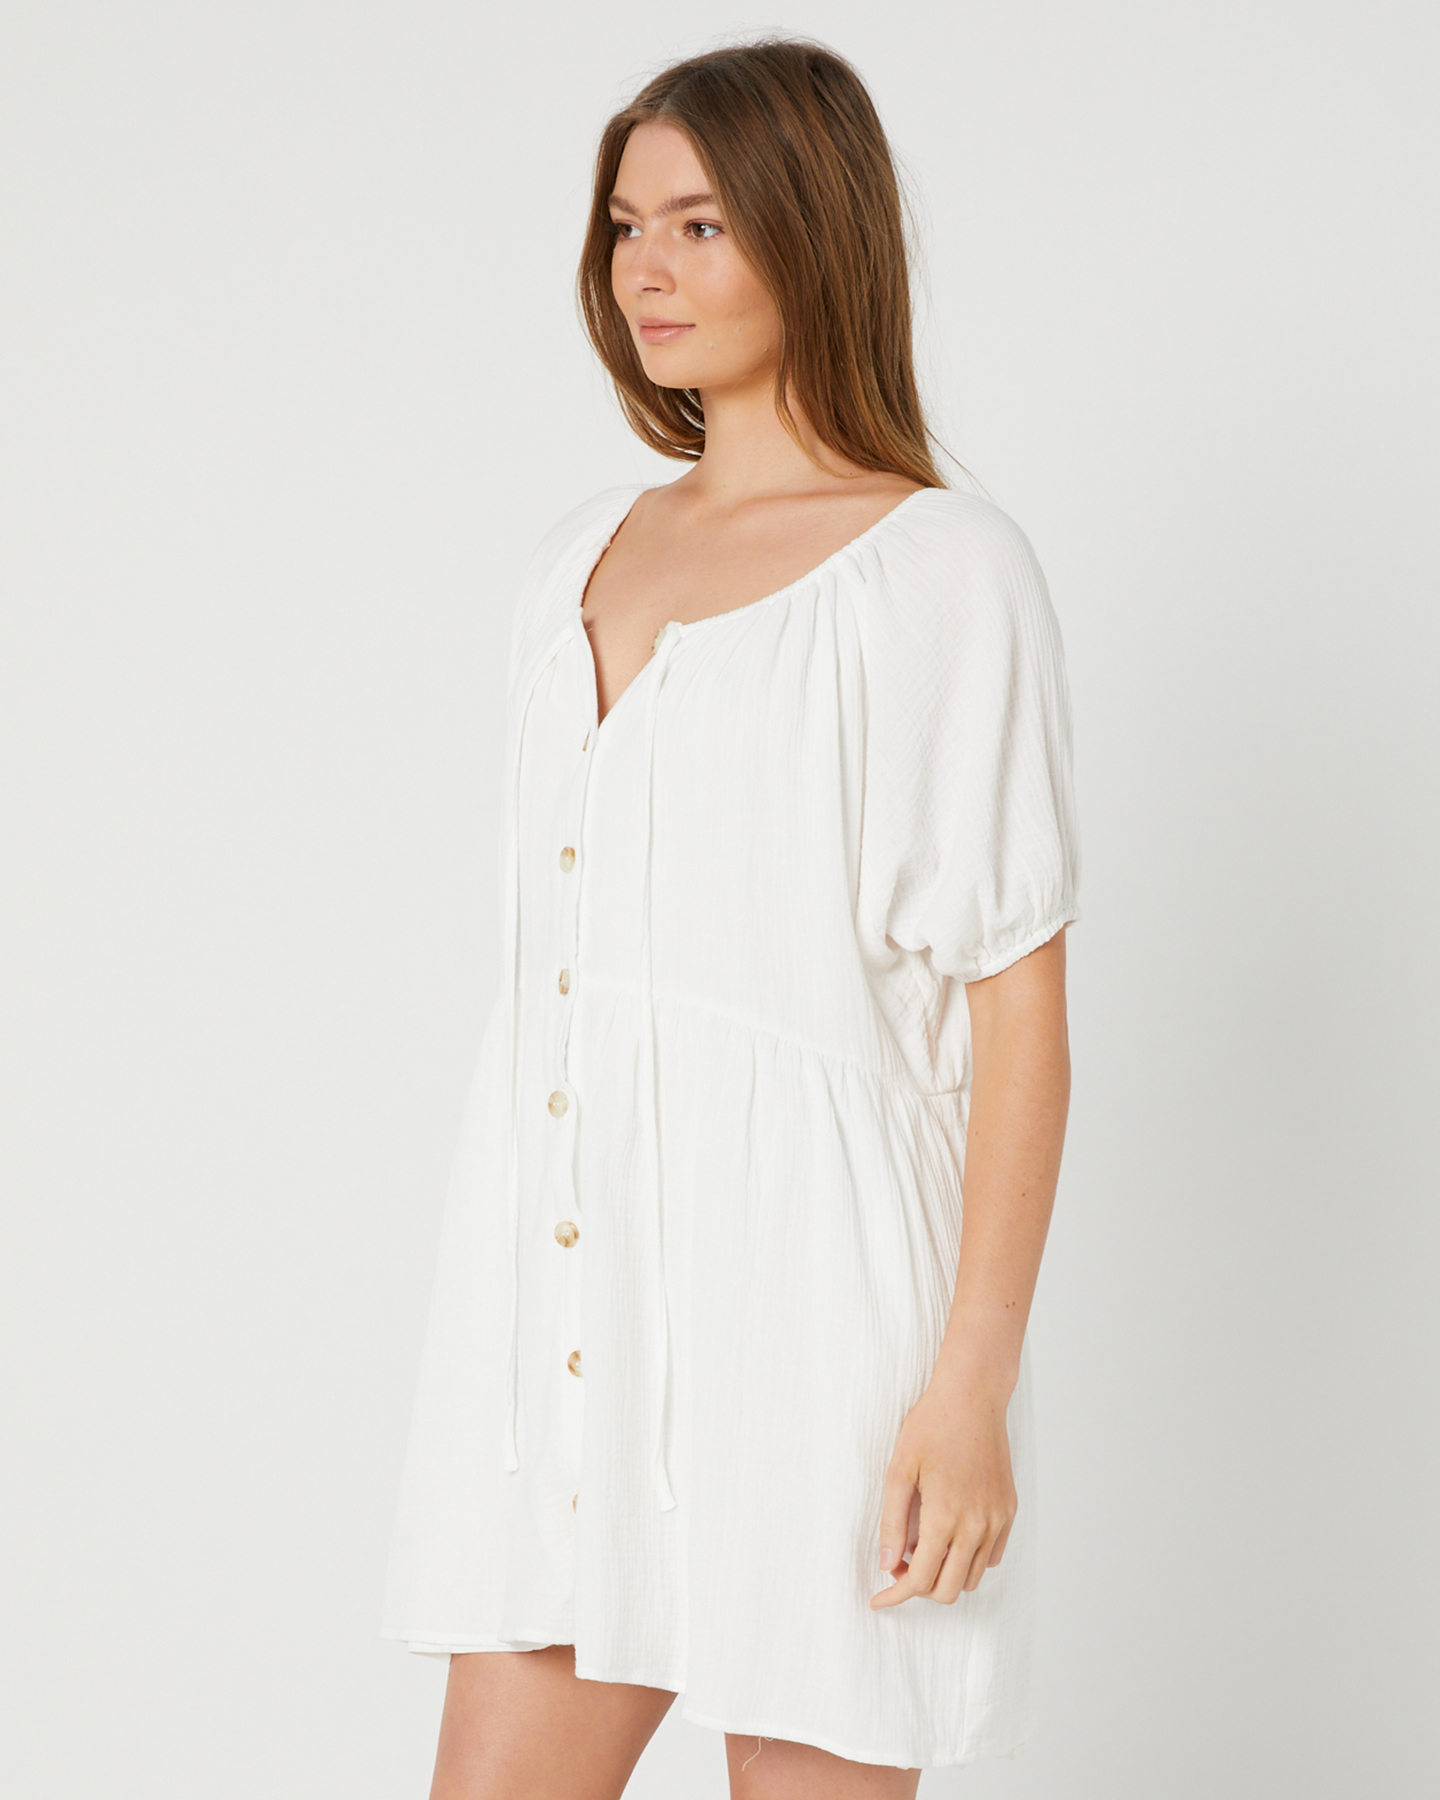 Girl And The Sun Adalee Mini Dress - White | SurfStitch